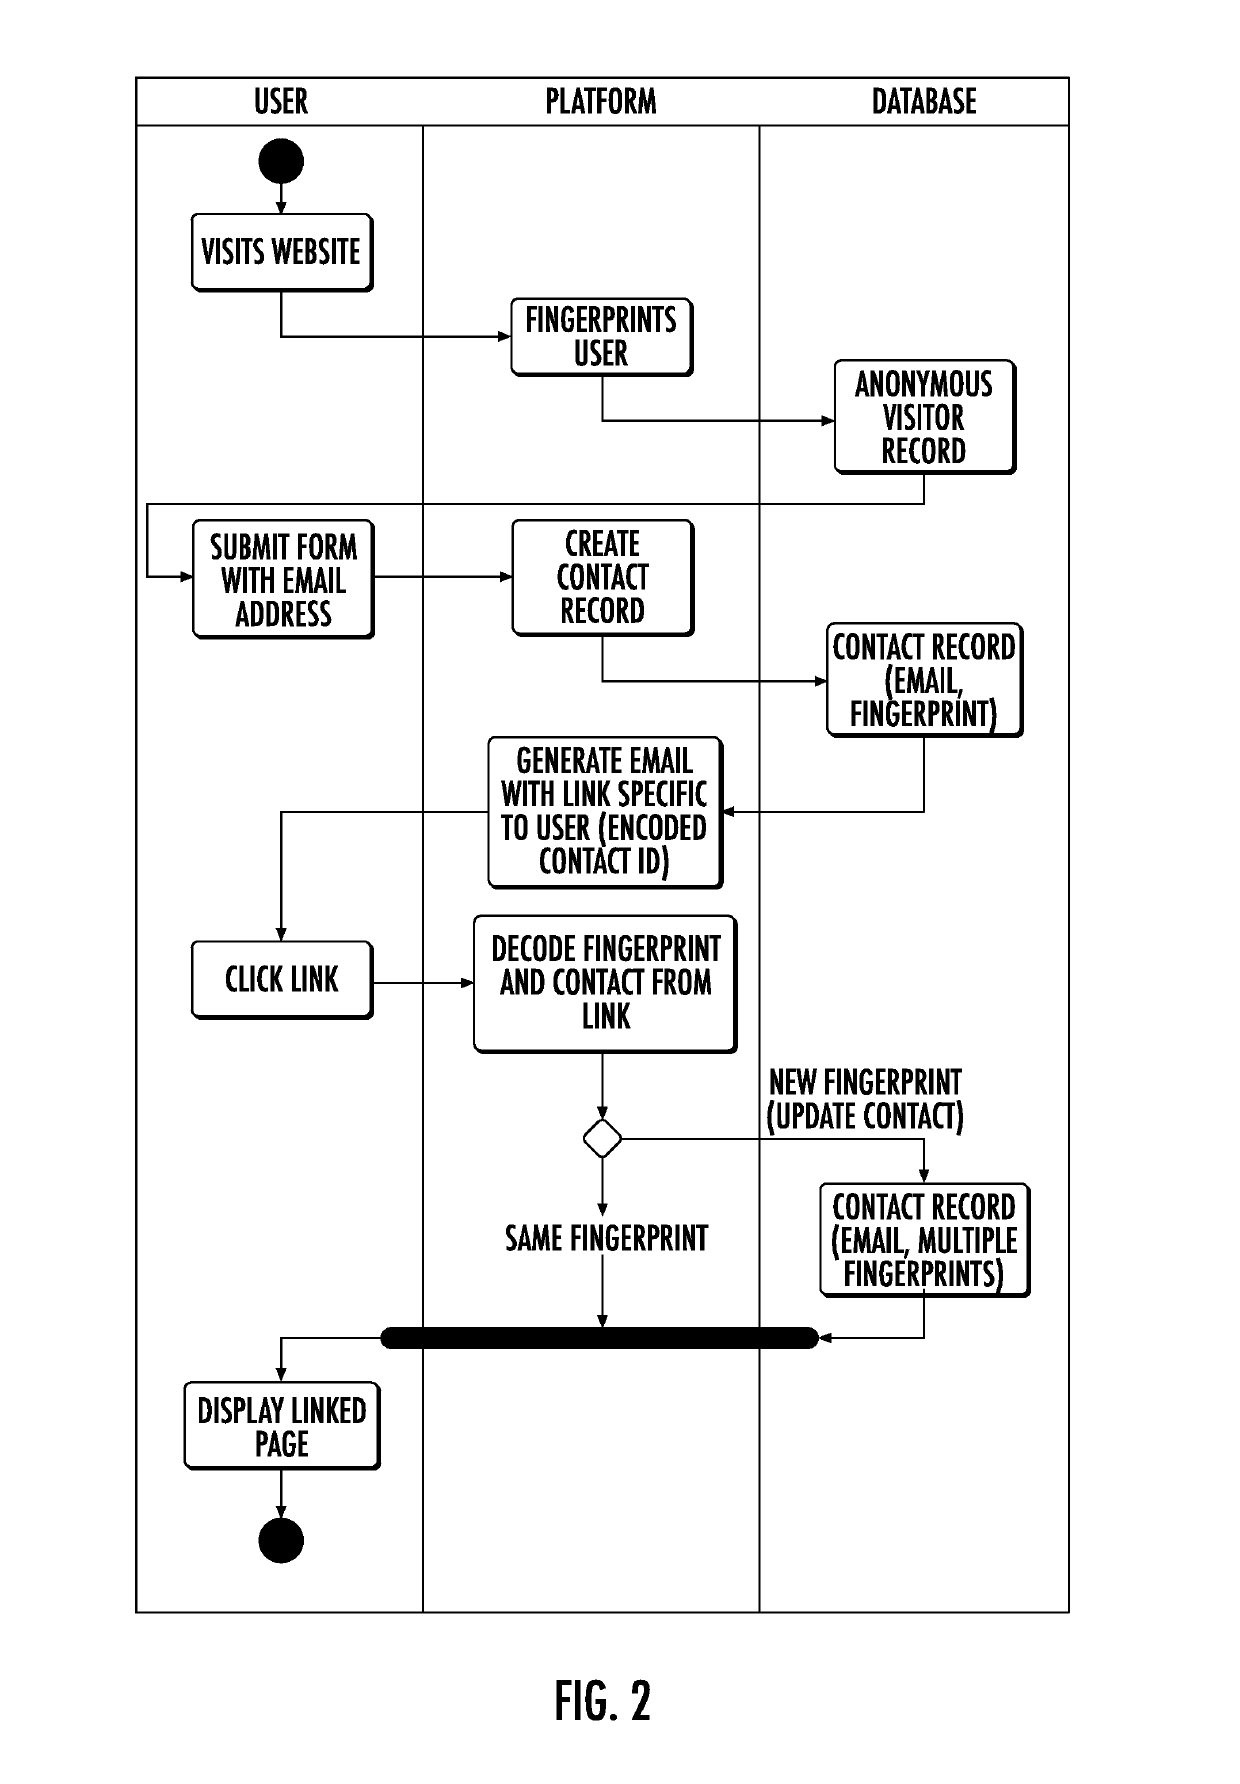 System and method for tracking online user behavior across browsers or devices